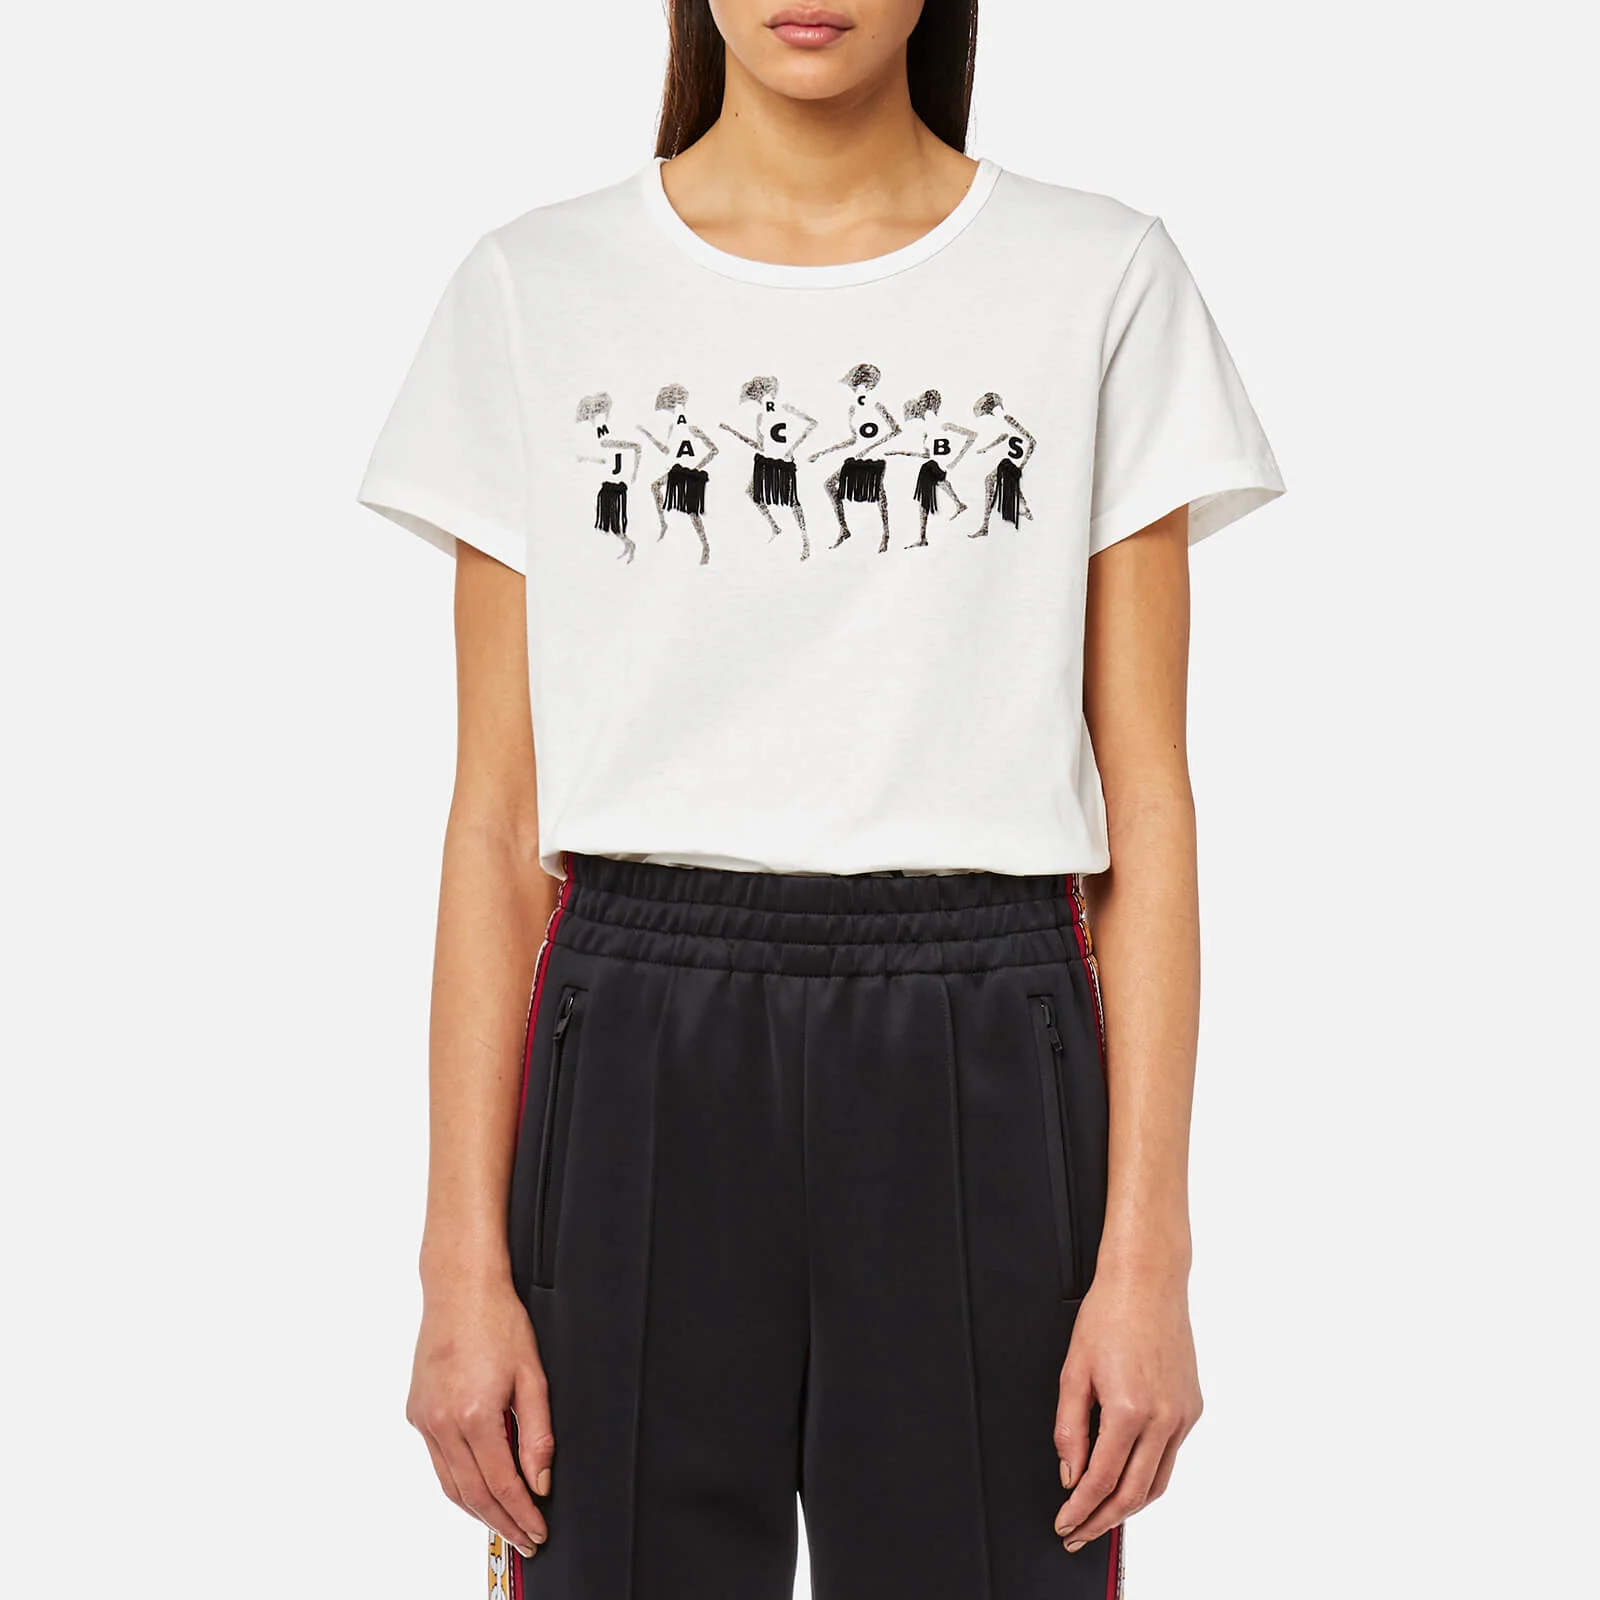 Marc Jacobs Women's Classic T-Shirt with Embroidery - Ivory Image 1